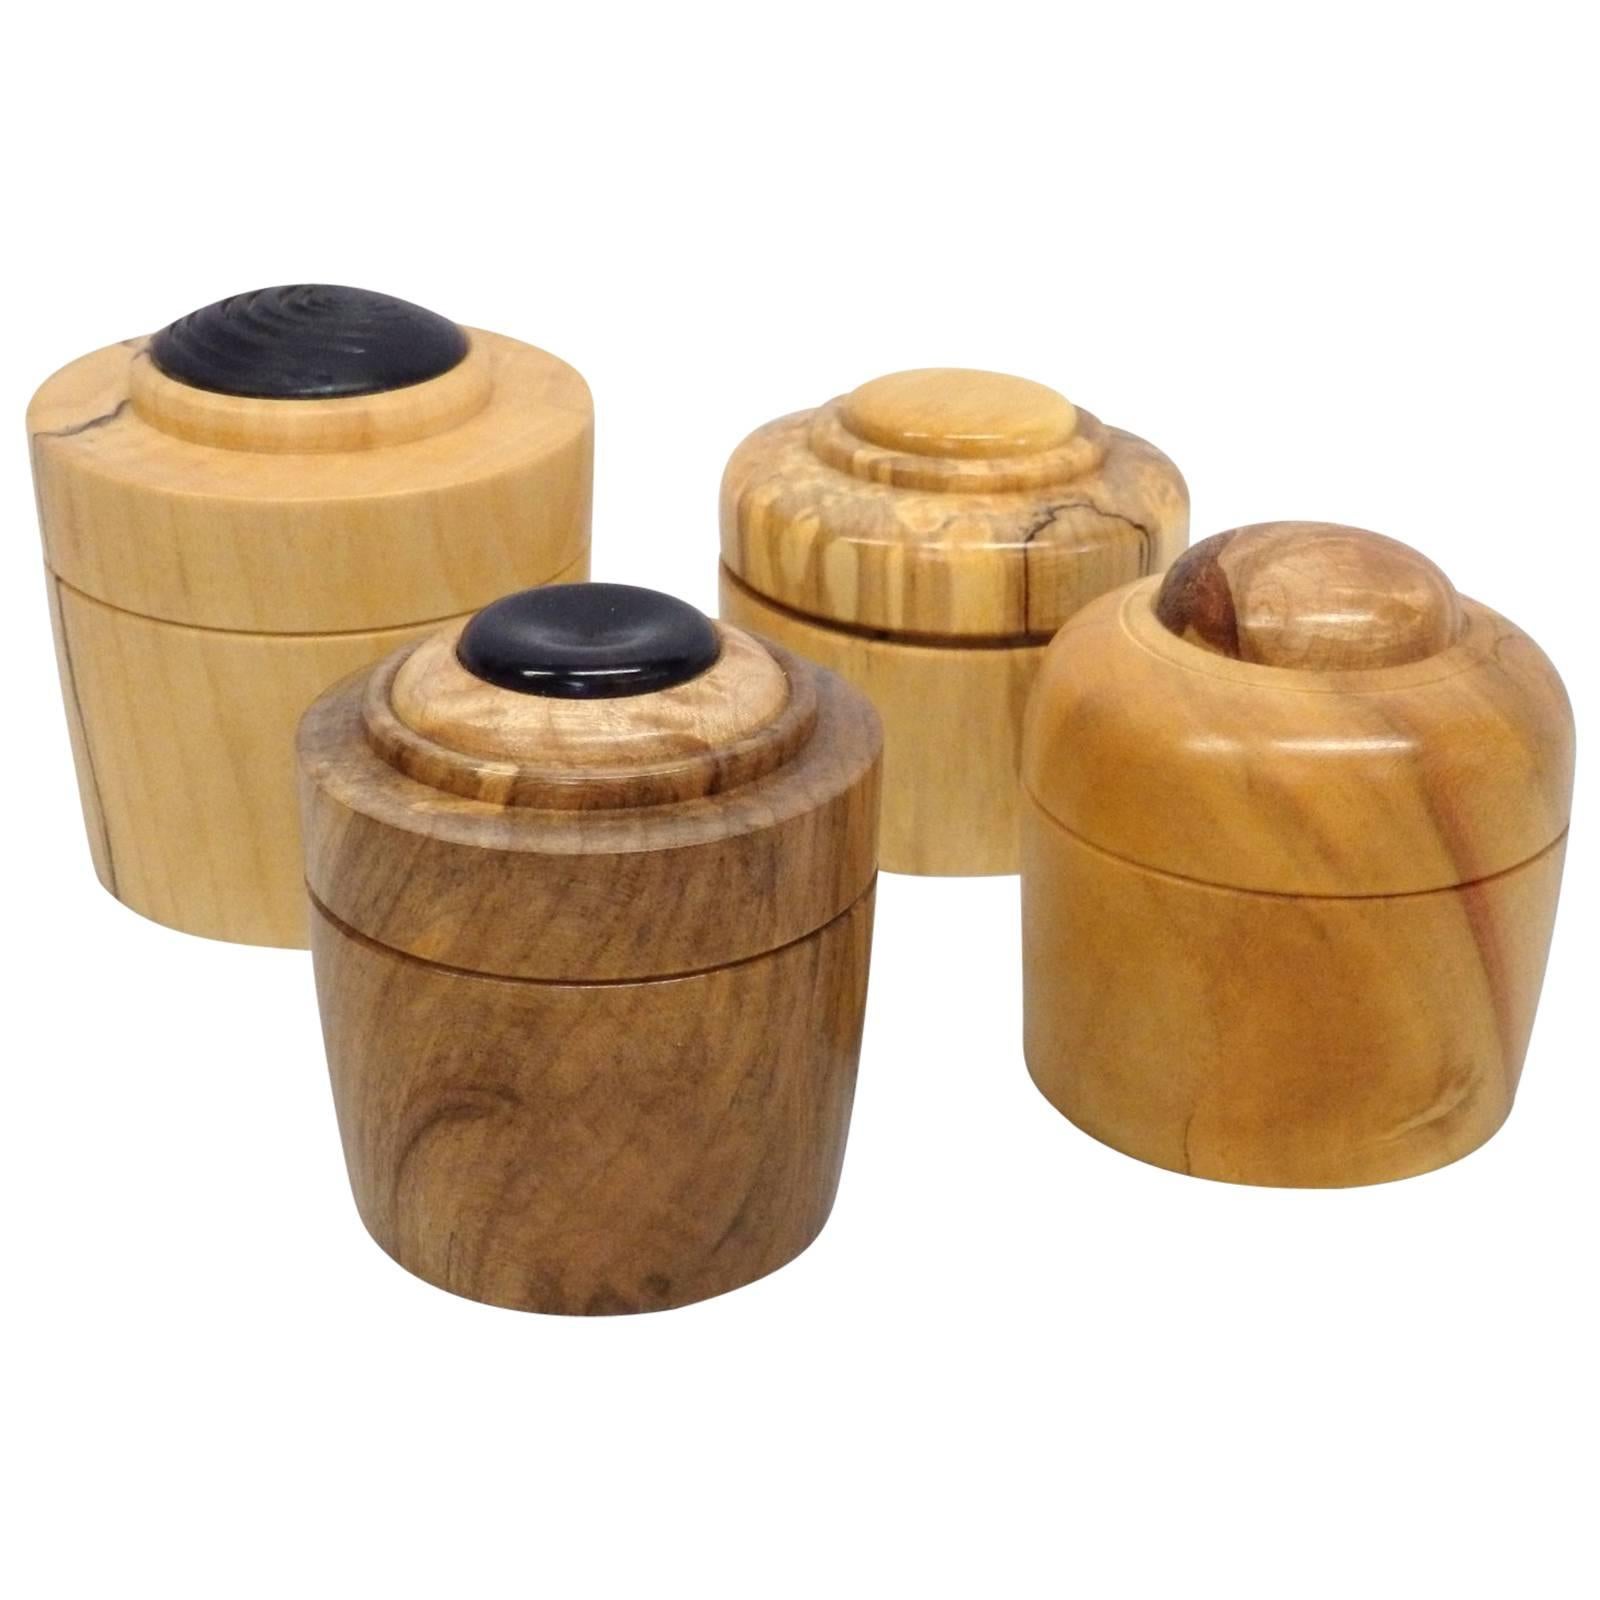 Four Studio Turned Wood Gift Canisters by Steve Sharpe For Sale